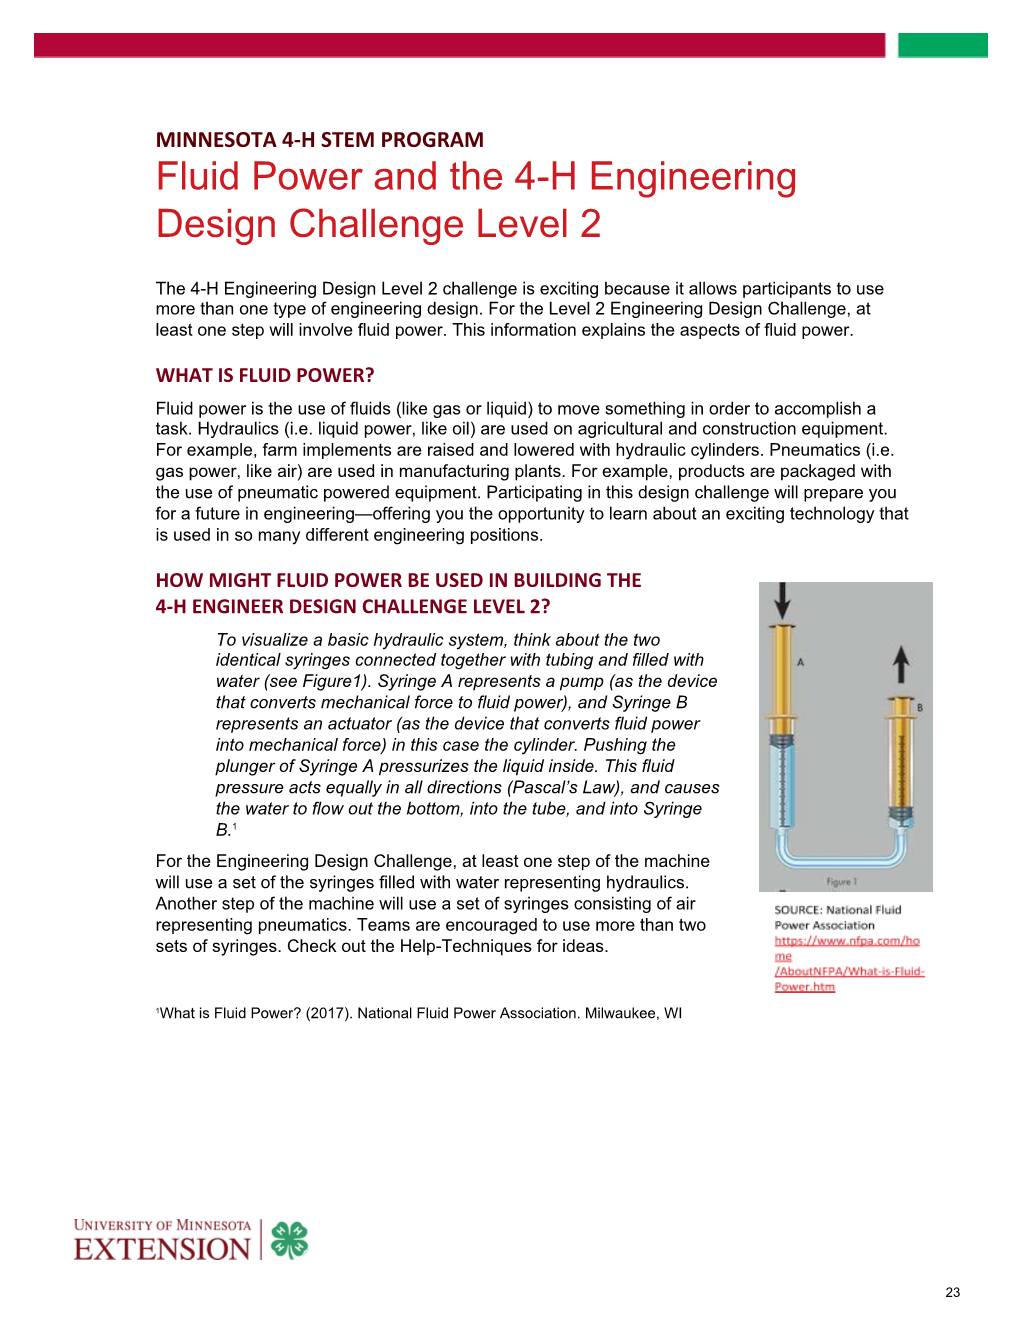 Fluid Power and the 4-H Engineering Design Challenge Level 2